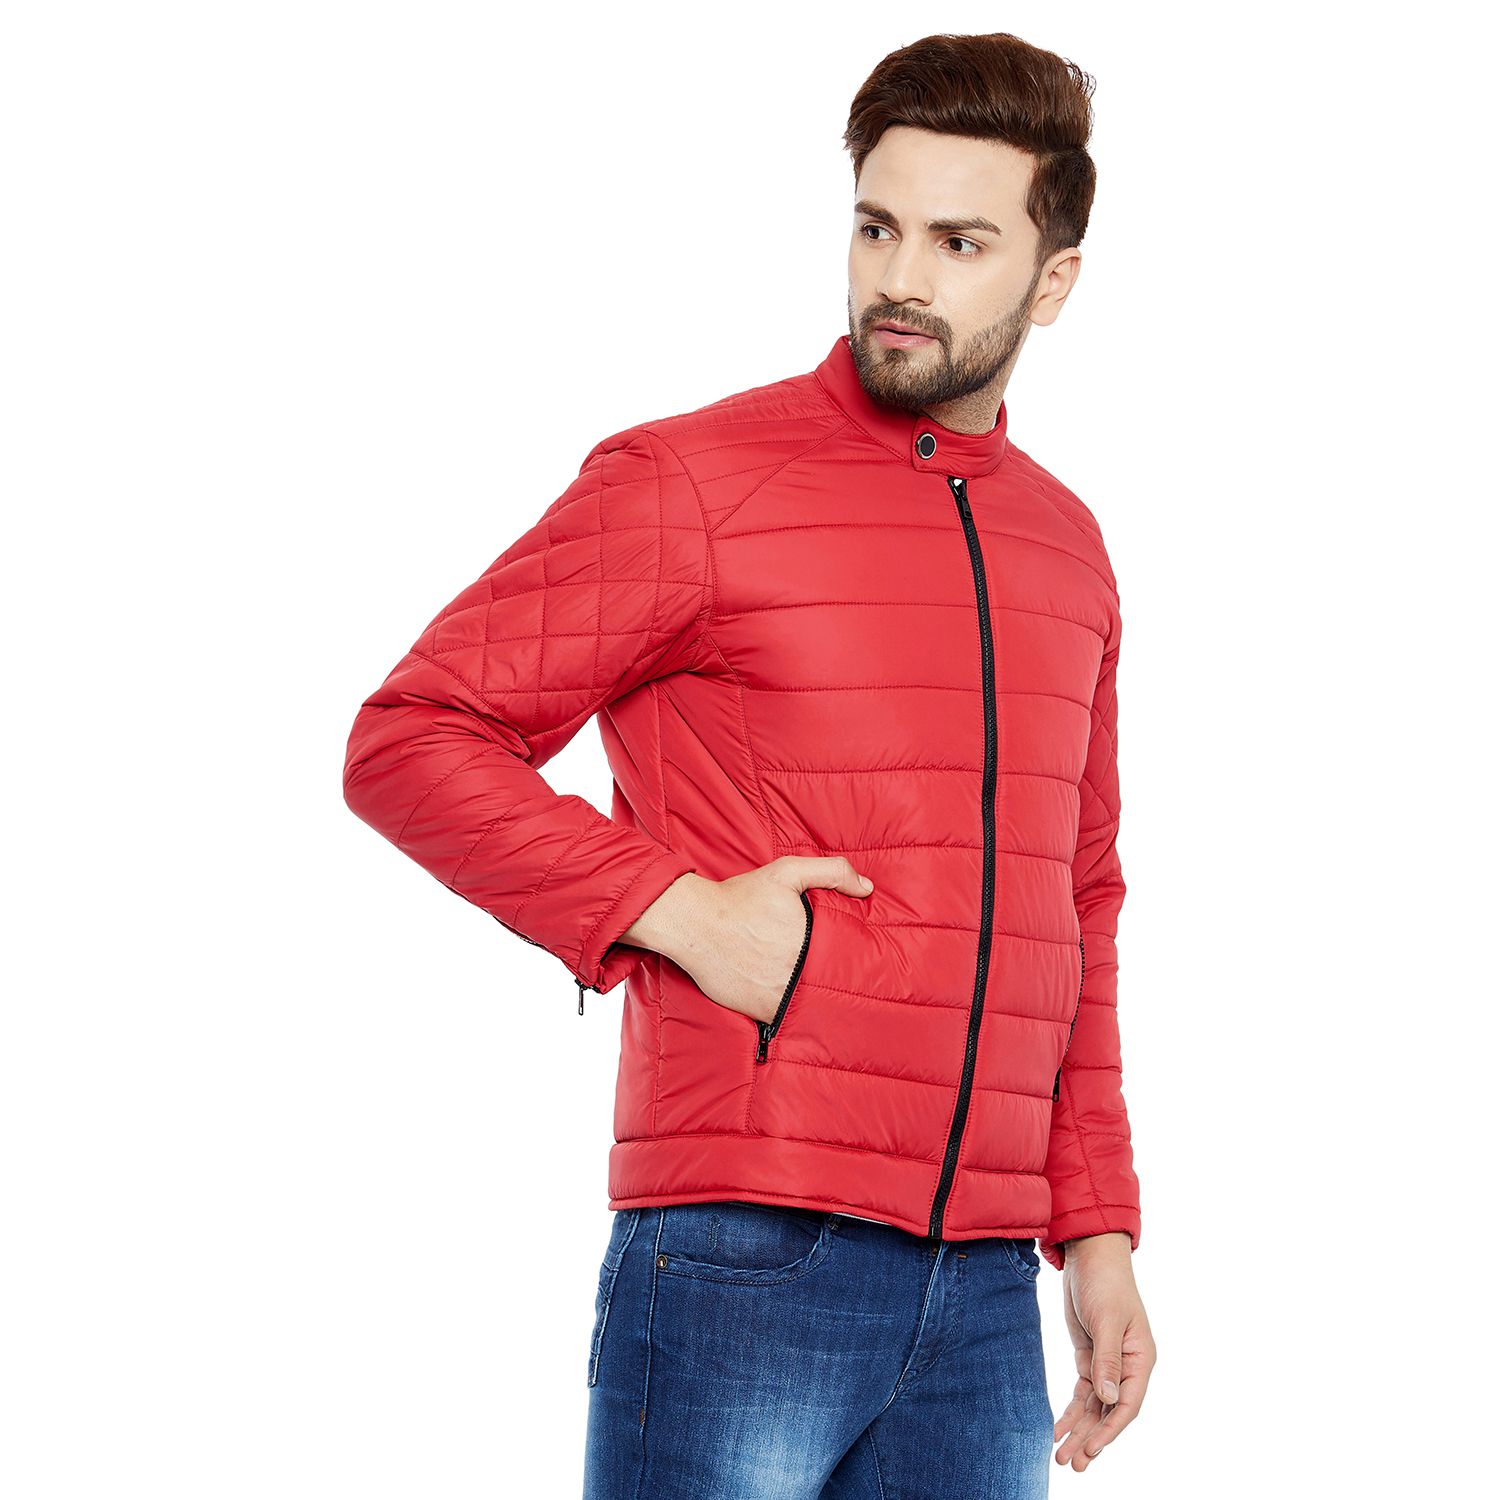 Canary London Red Quilted & Bomber Jacket - Buy Canary London Red ...